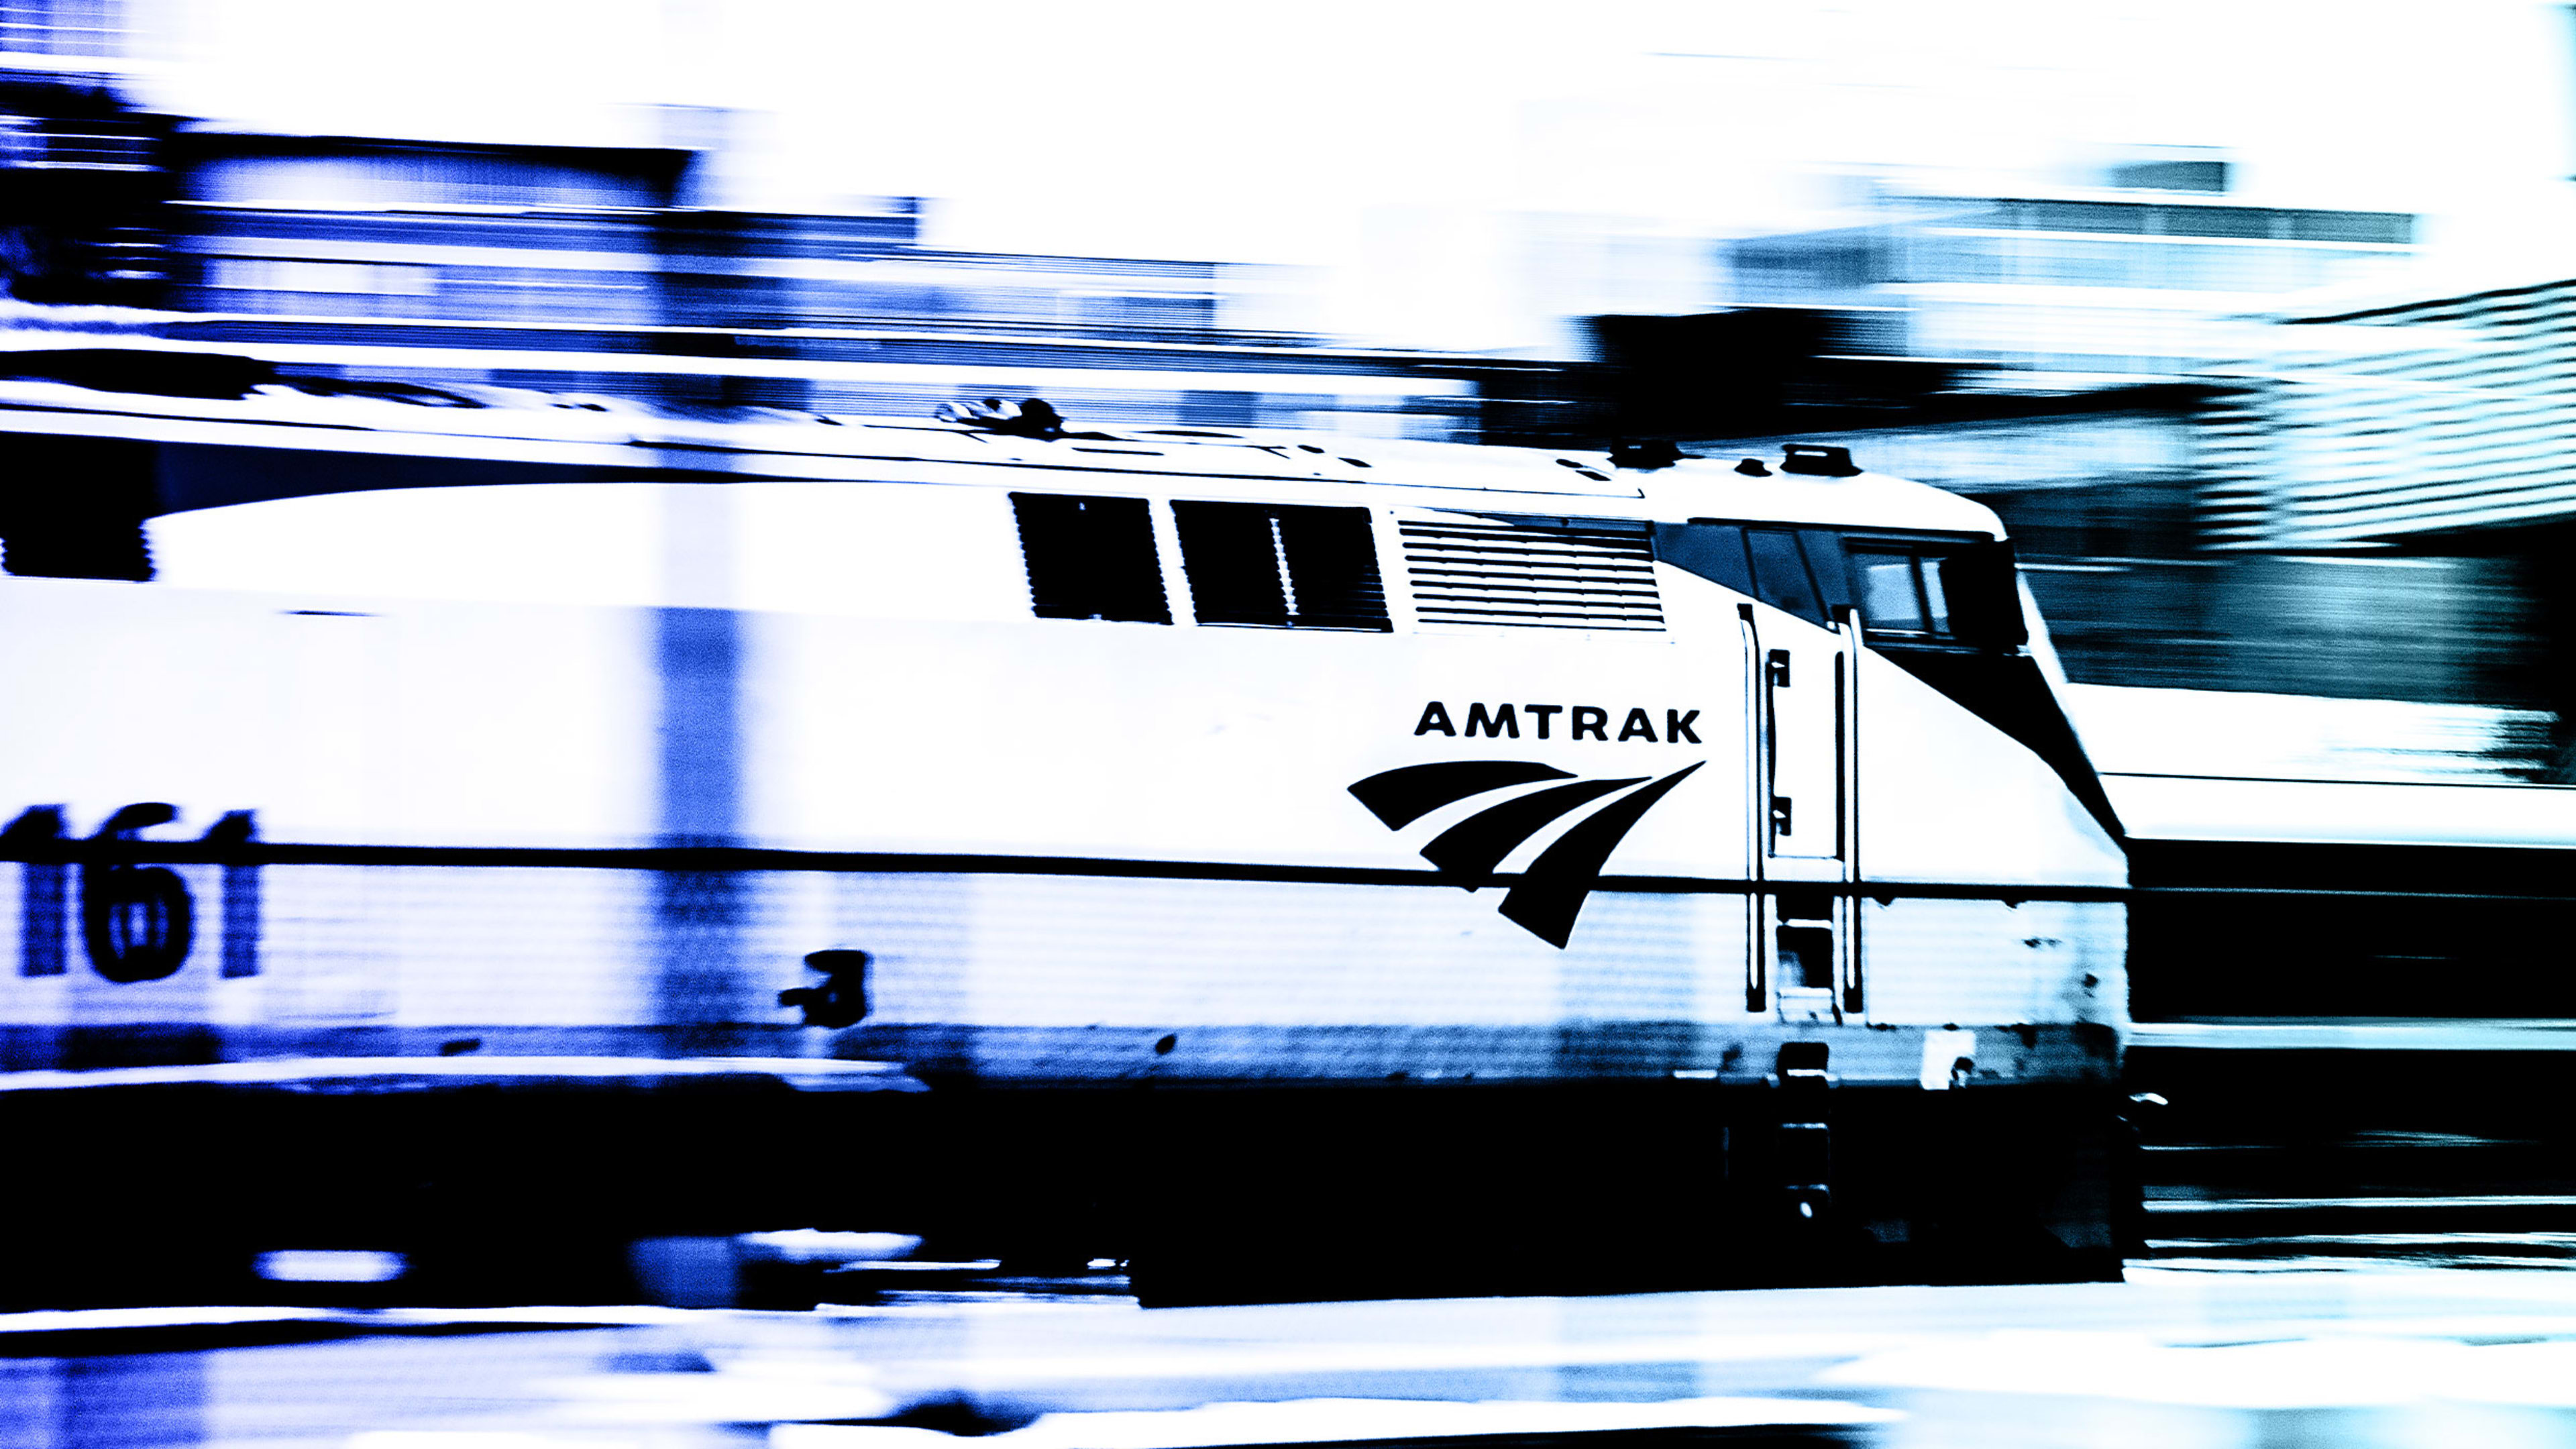 Amtrak is going on a mass hiring spree this week with 4,000 open positions: Here’s what to know